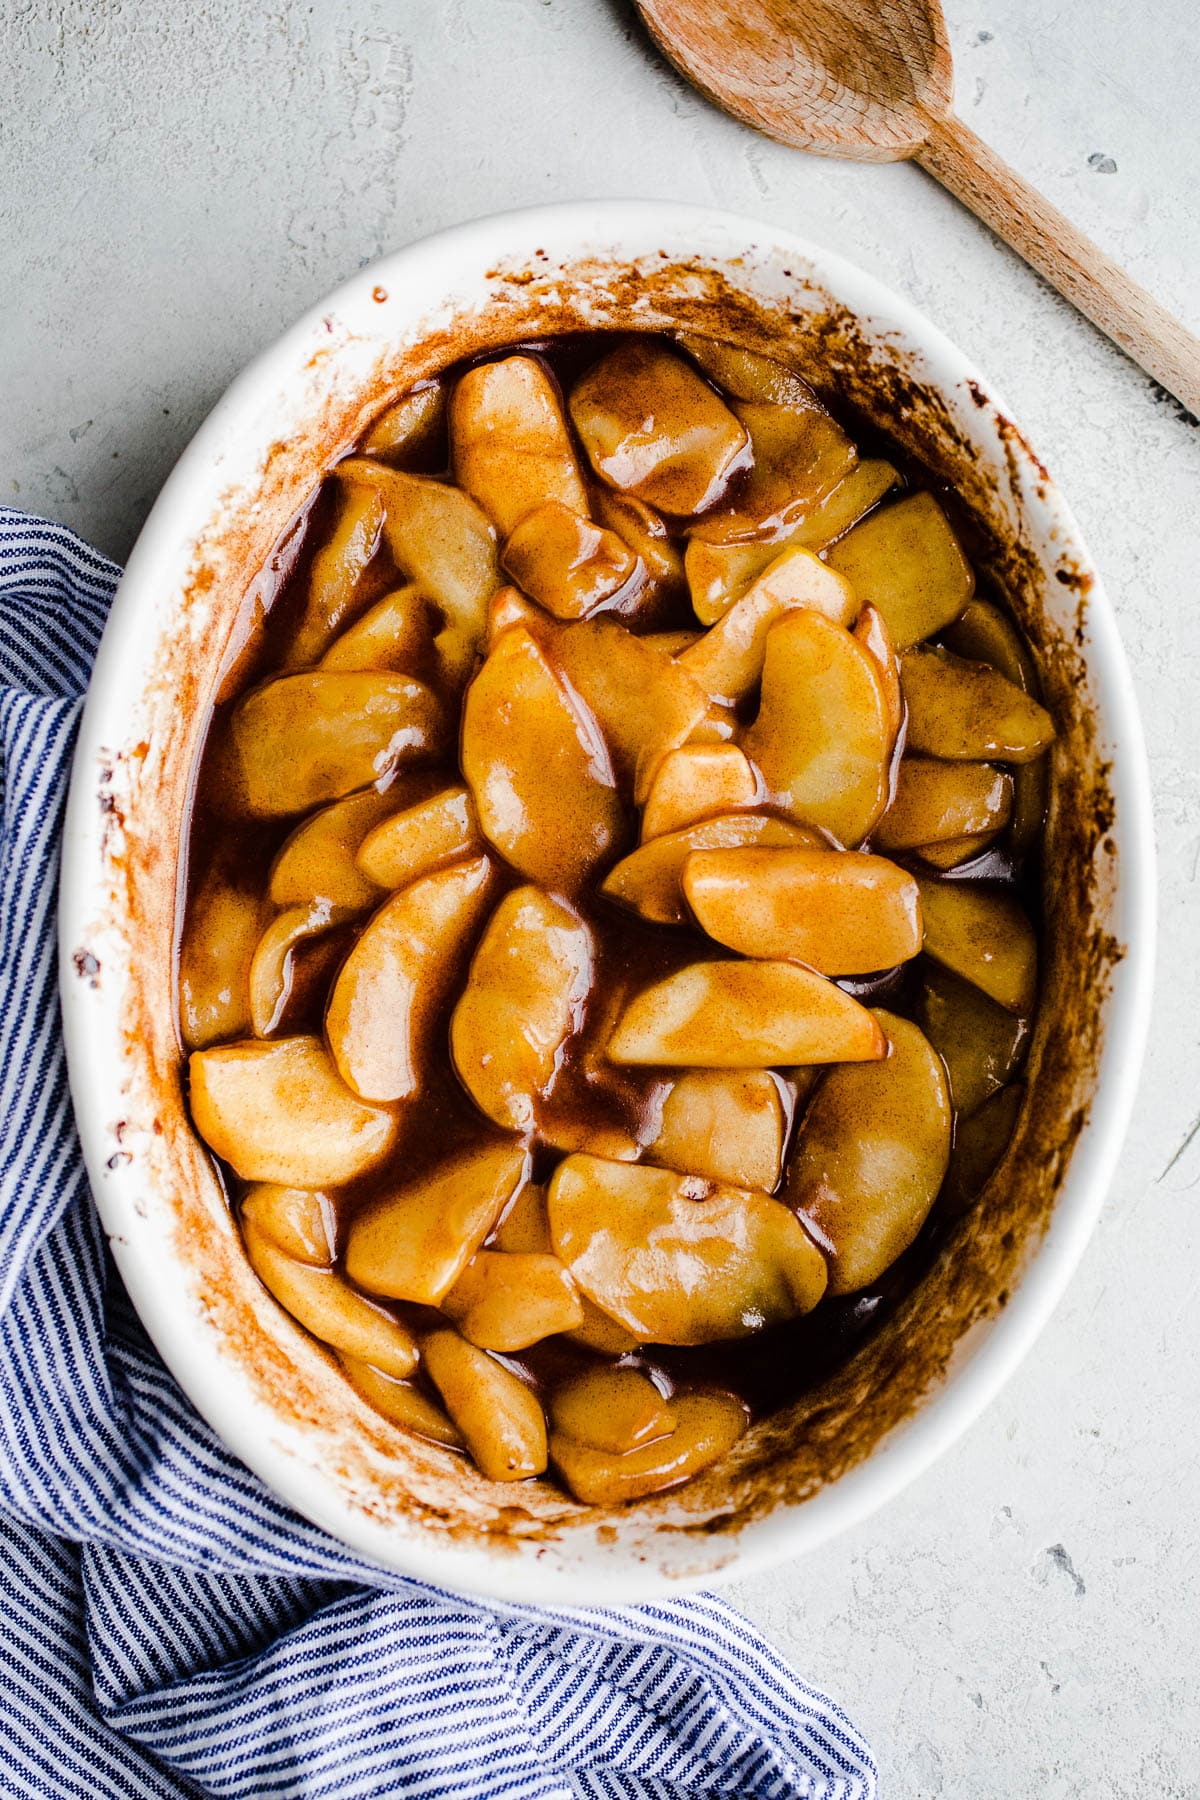 Cinnamon baked apples in a white baking dish.